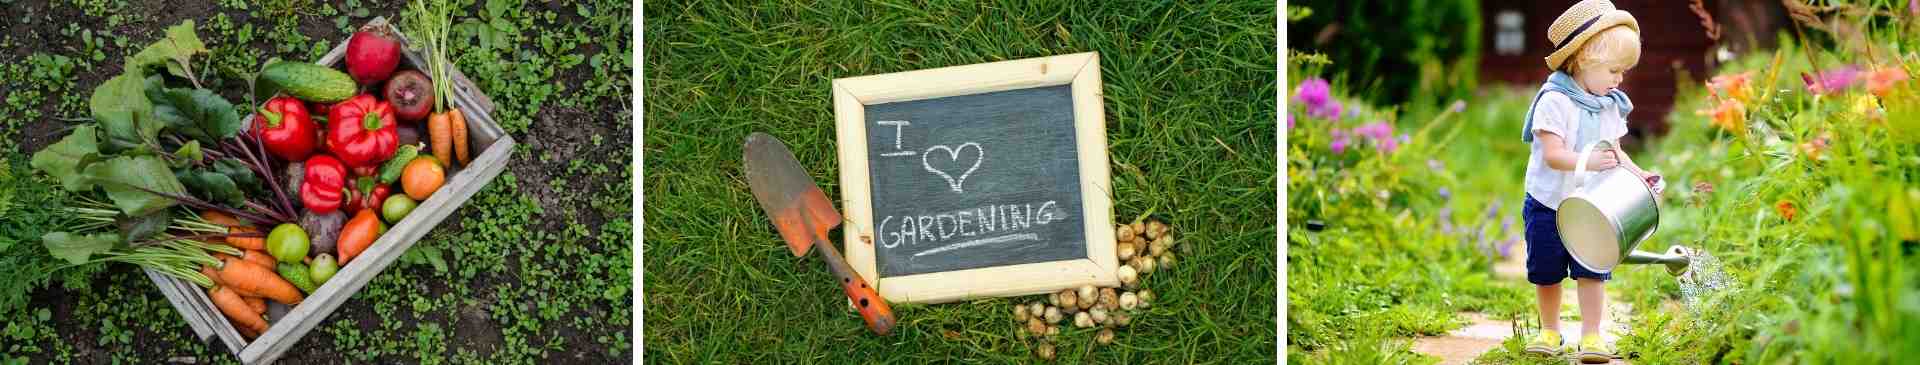 Thinking of Taking Up Gardening? 8 Convincing Reasons You Should Start Today